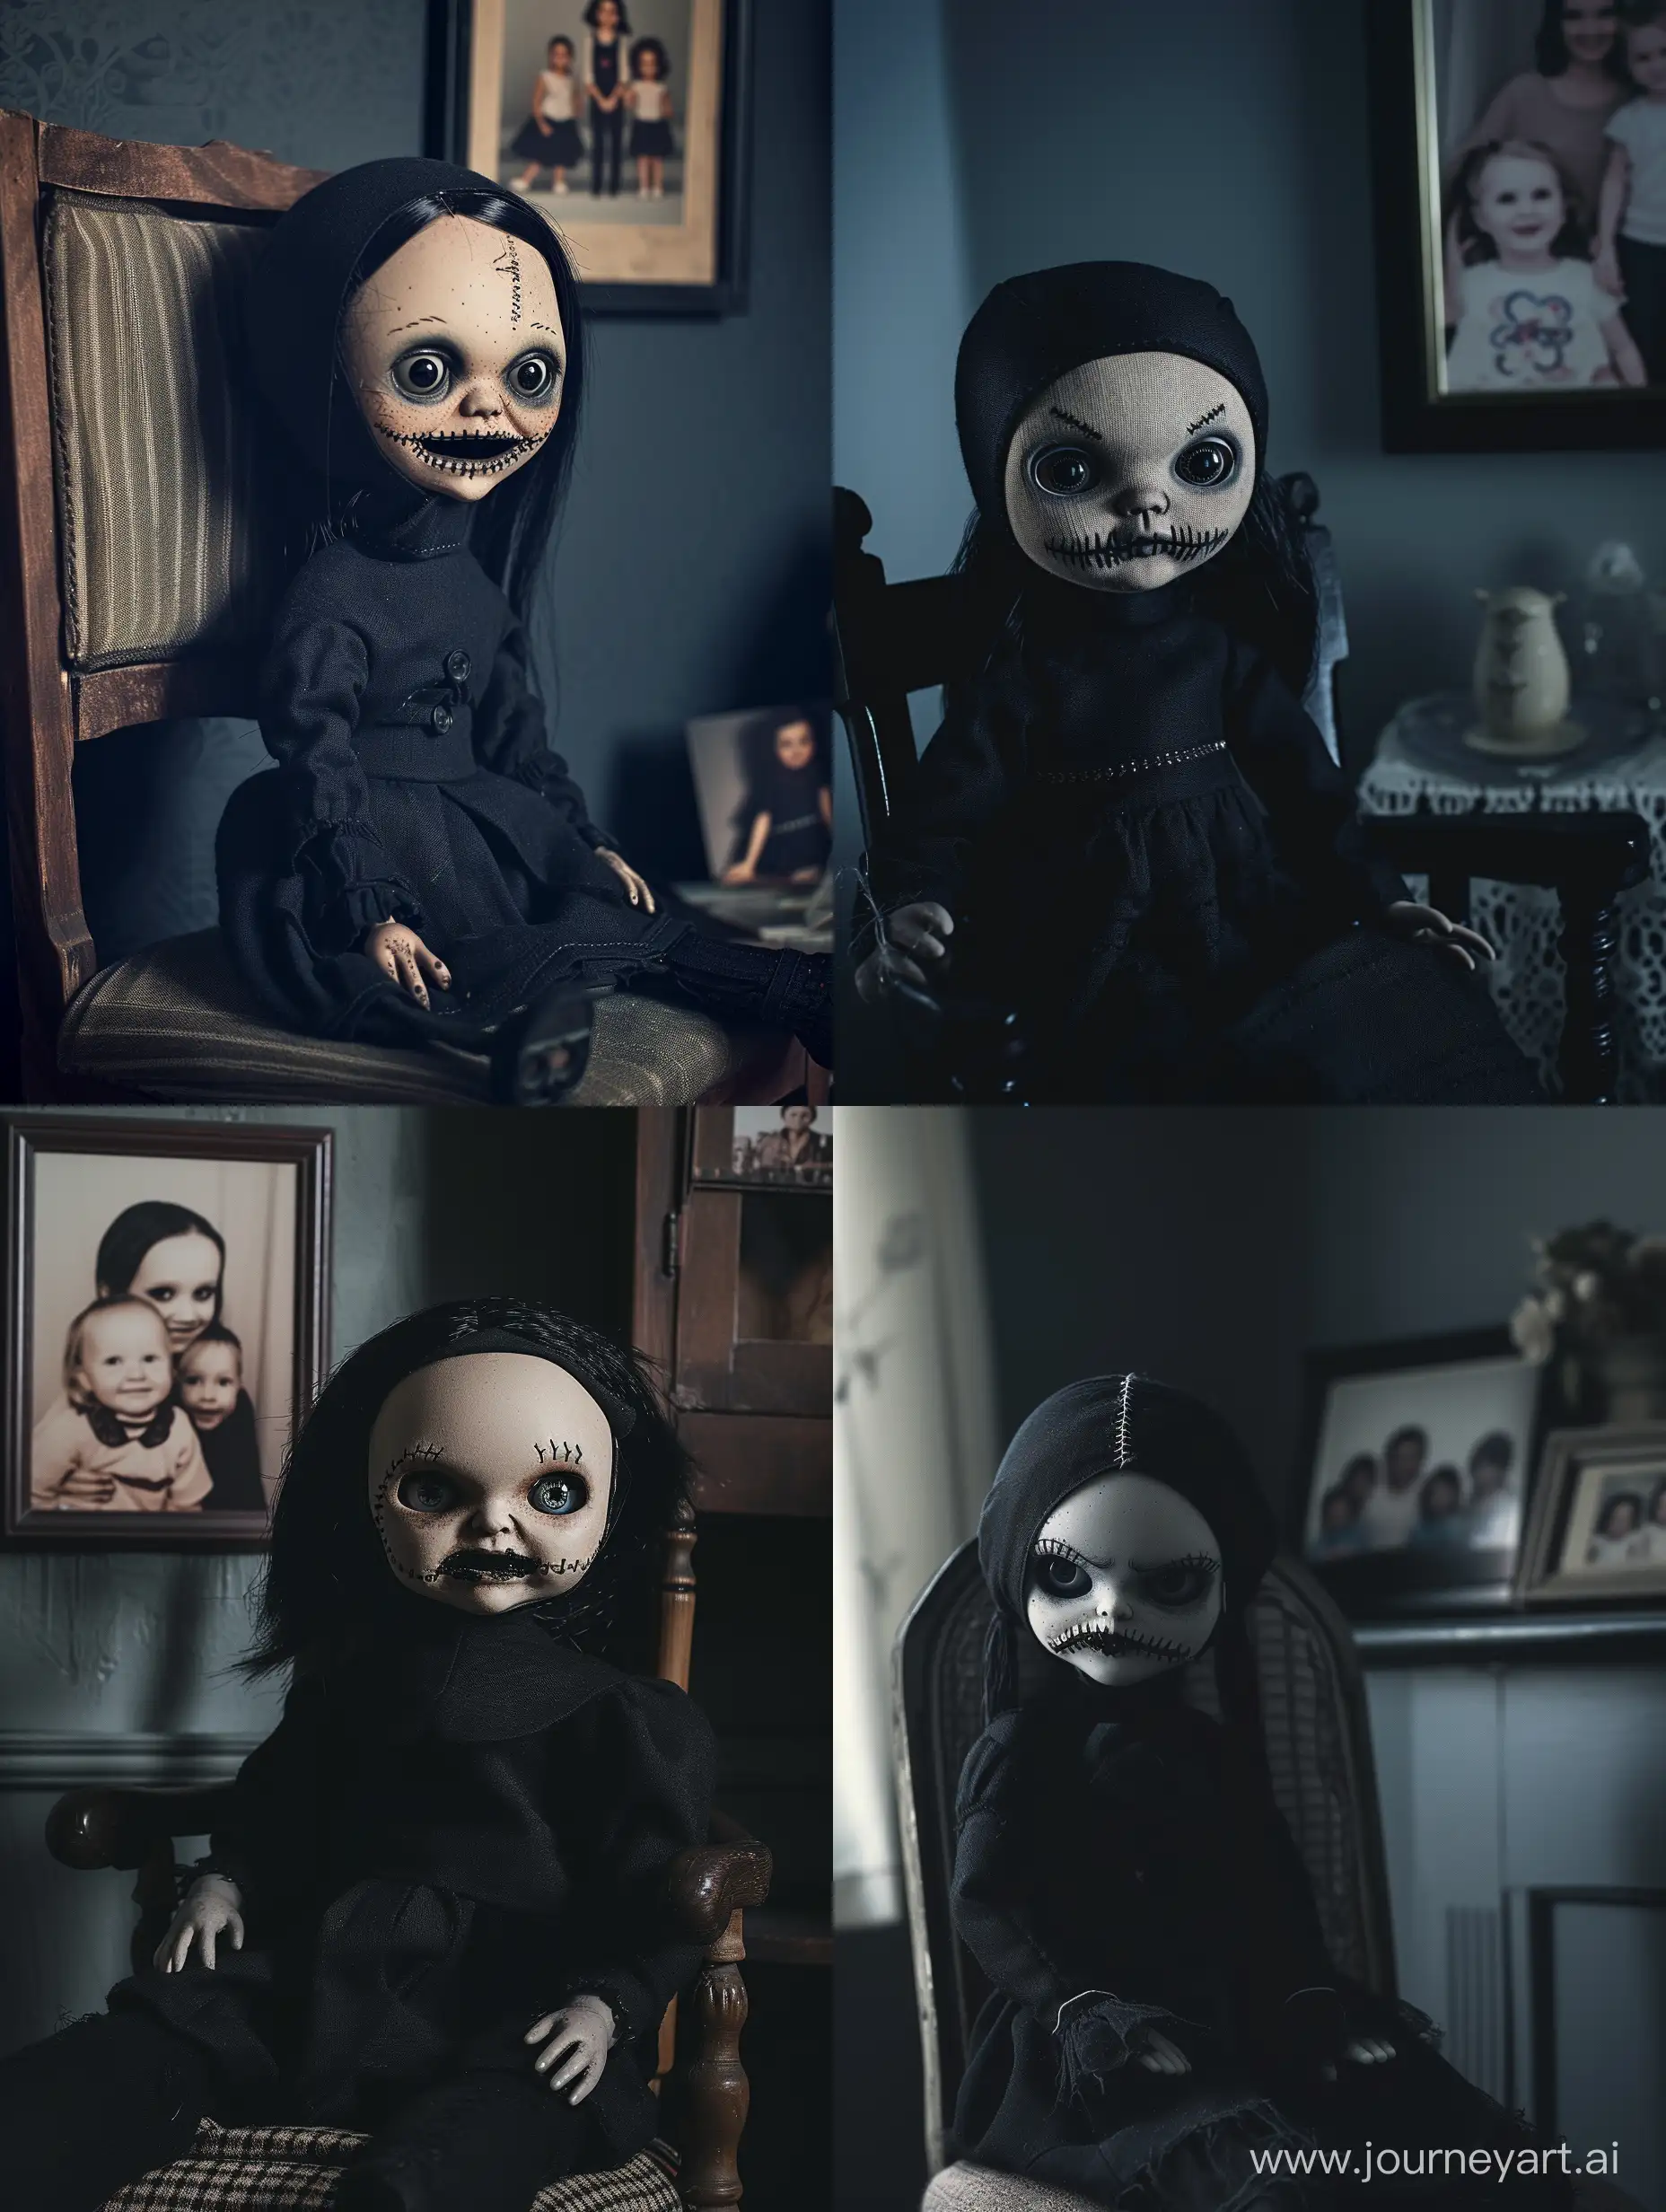 Creepy girl doll with black attire and stitched mouth sitting on a chair in the dark room. There is a happy family photo at the wall. The doll is staring at the camera with creepy look. Dark room. Thriller. Cinematic shot. Realistic. 8K, HD, HQ